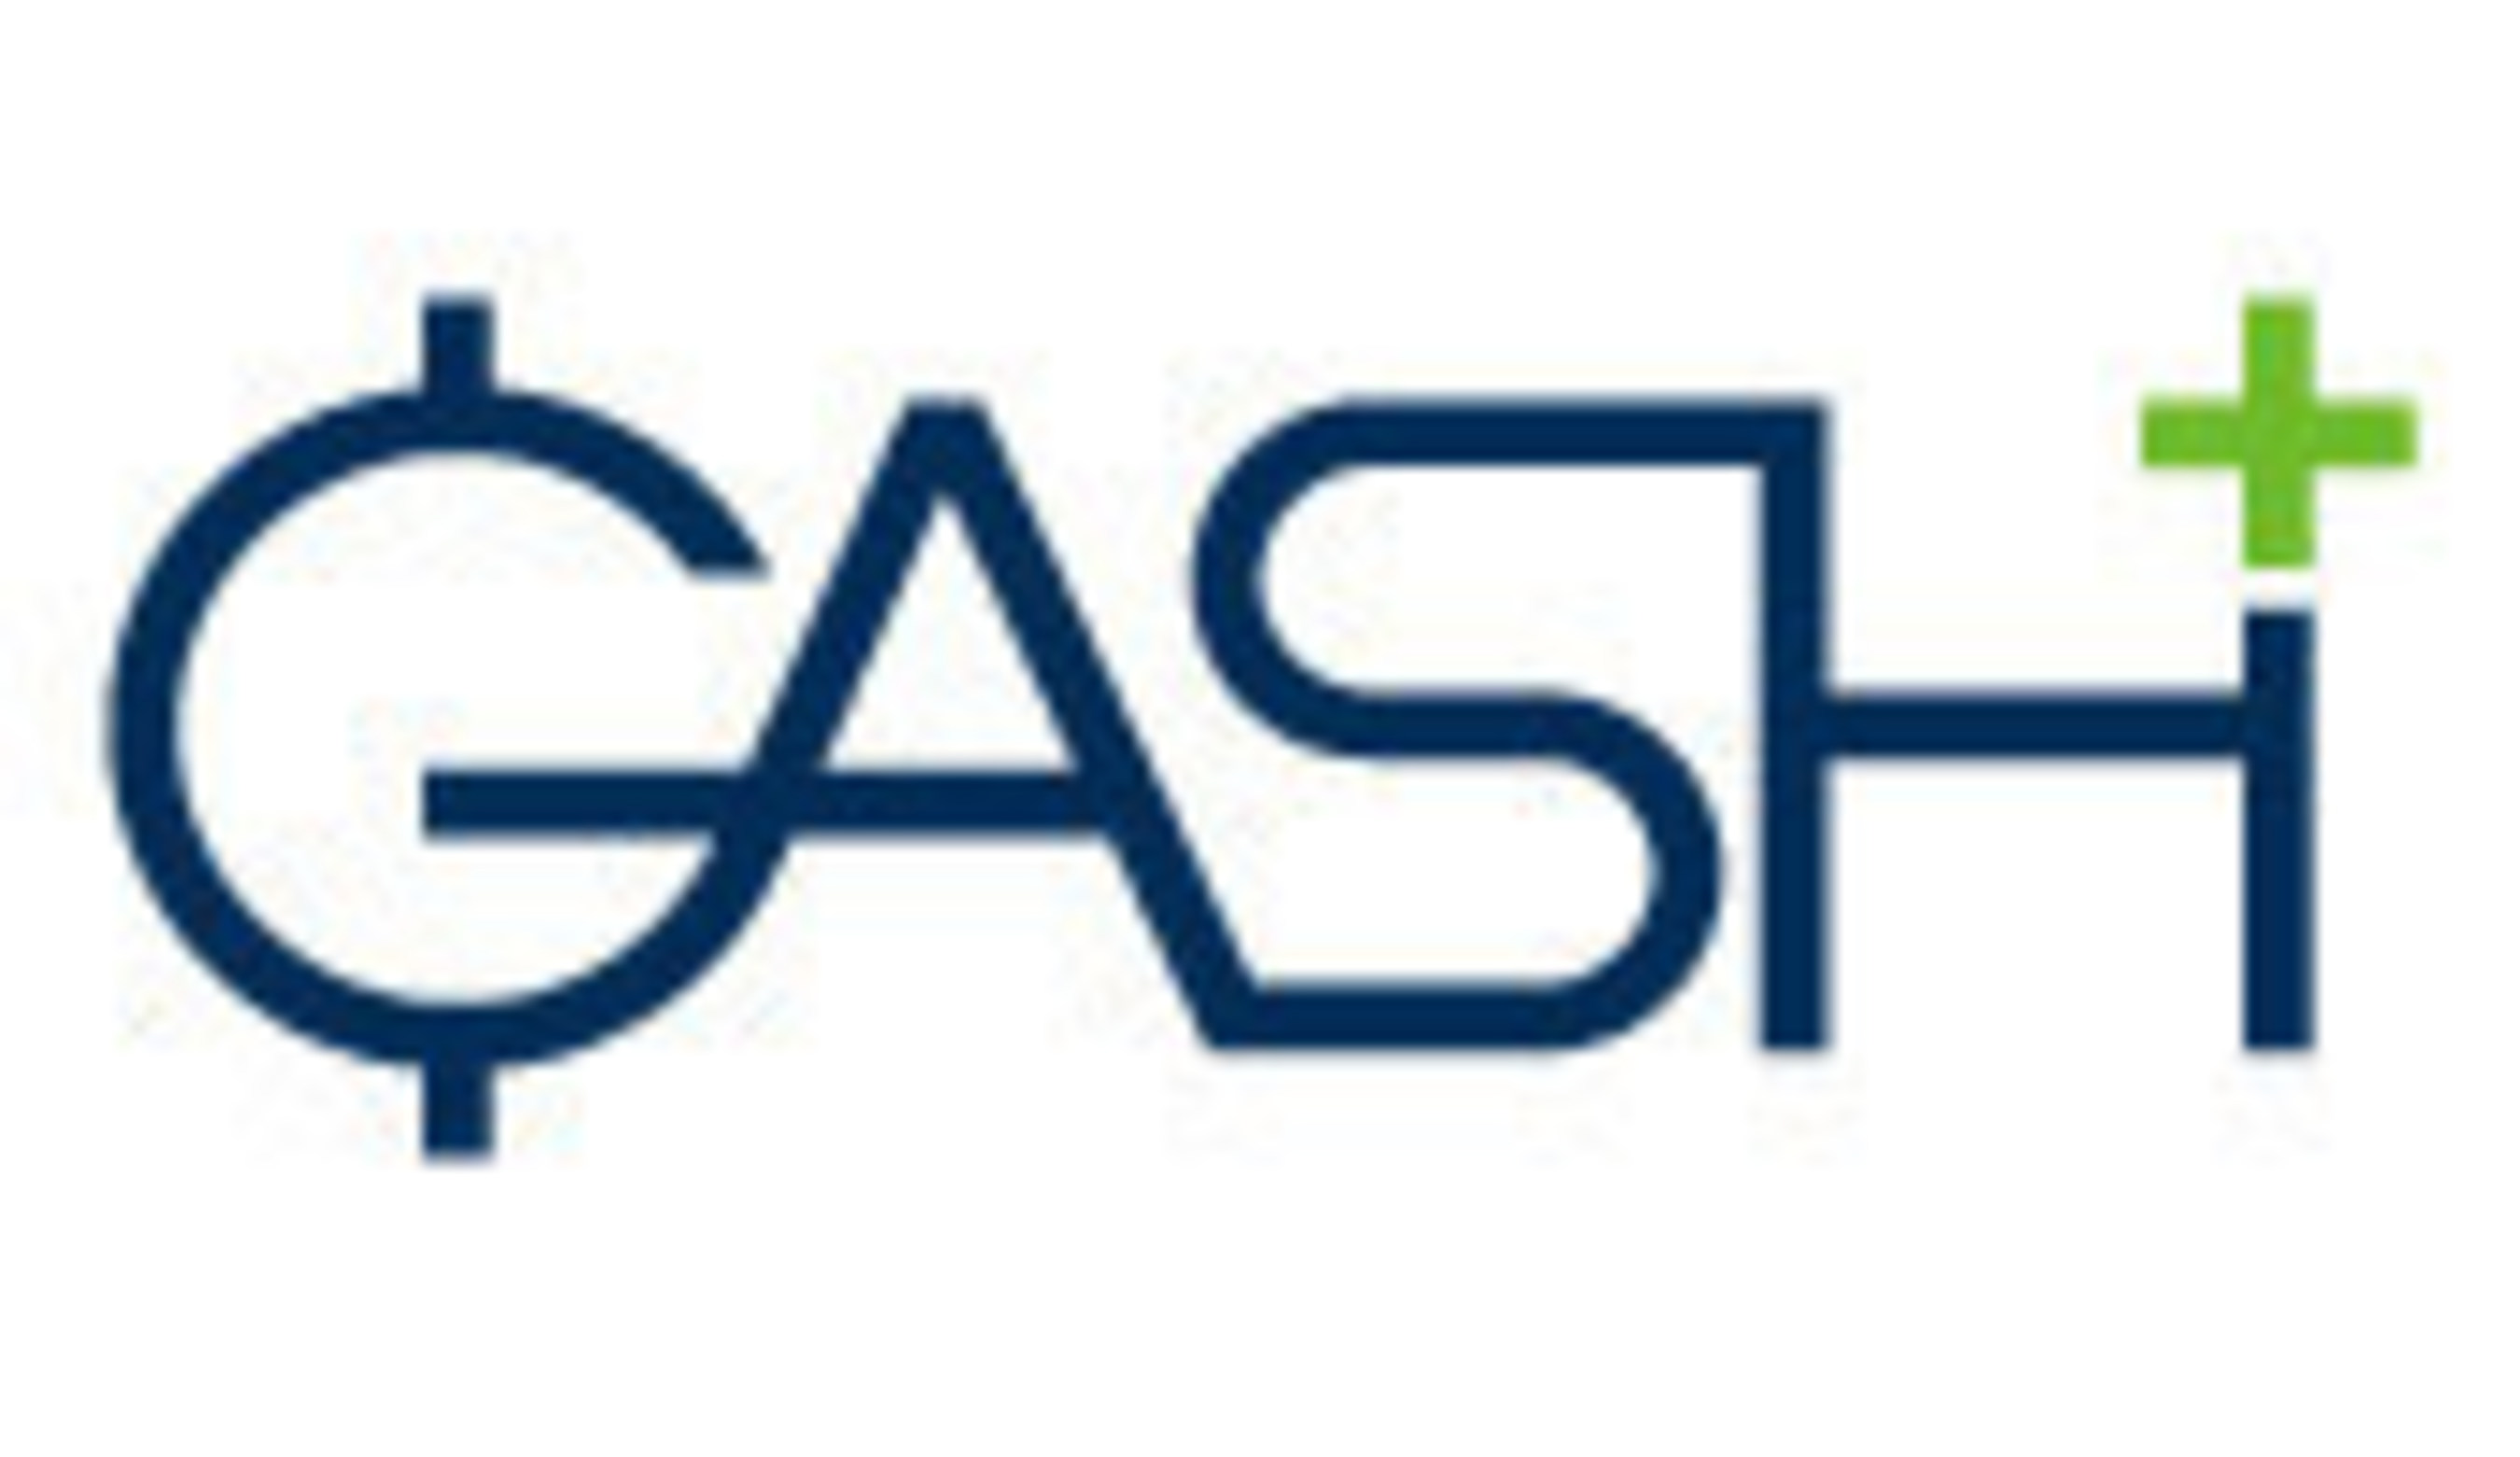 UOL BoaCompra and GASH PLUS Partner to Provide Cross-Payment Coverage for Online Games in Emerging Markets